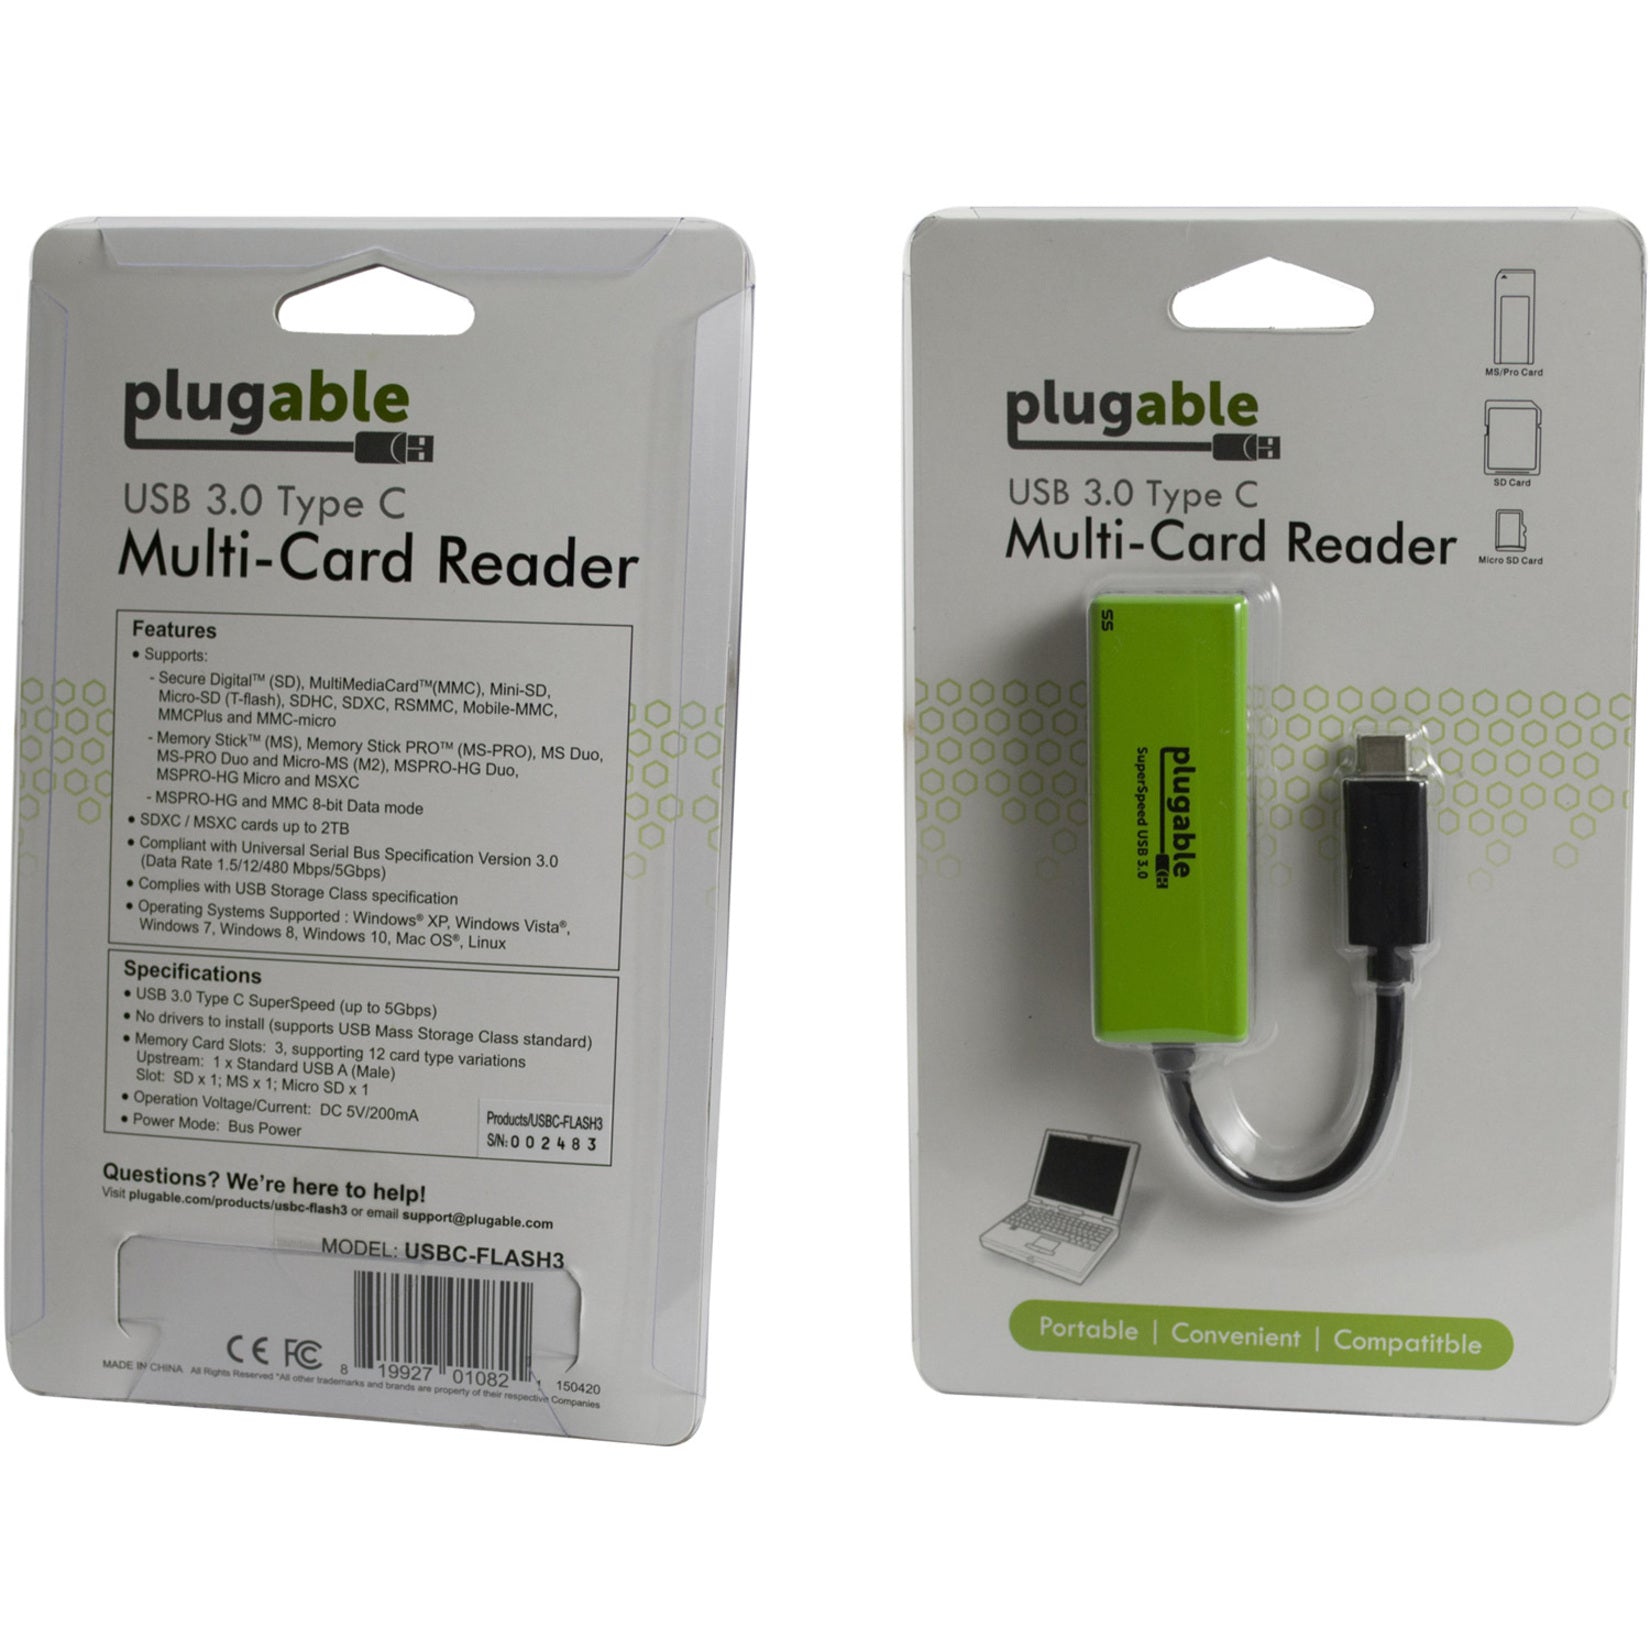 Plugable USBC-FLASH3 USB Type-C Flash Memory Card Reader, USB C Card Reader for SD, Micro SD, MMC, or MS Cards